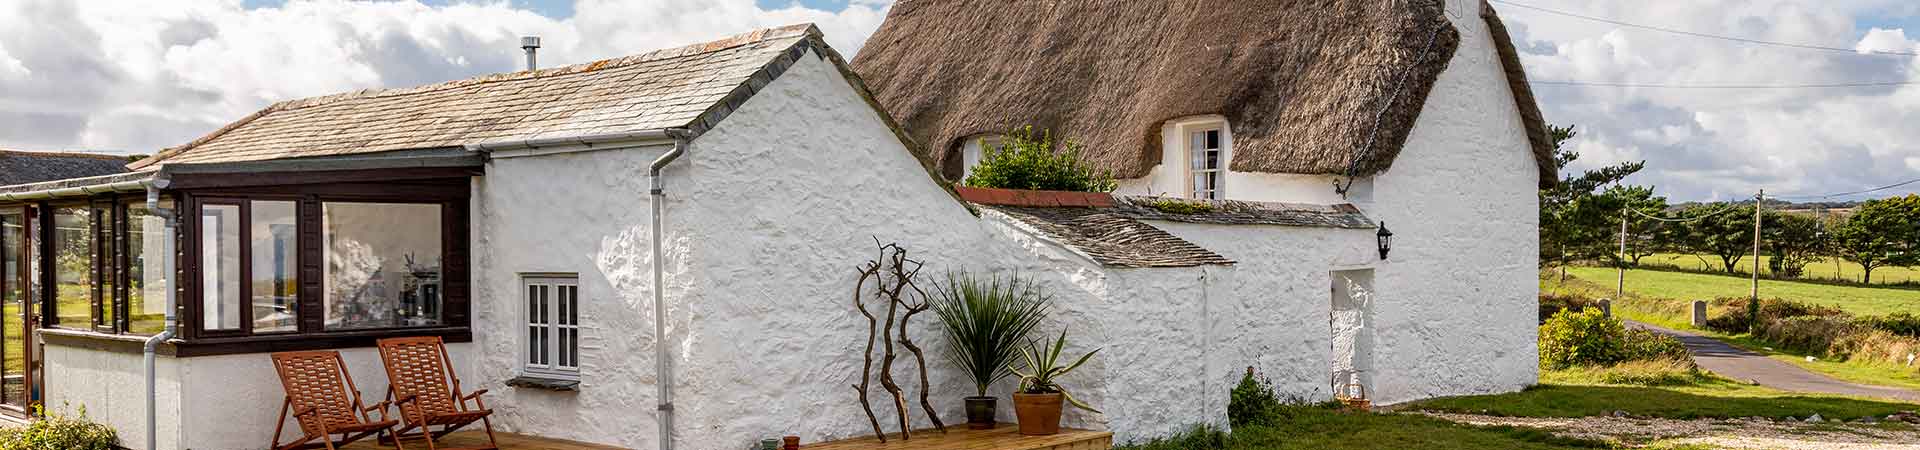 Thatched holiday cottages in Conwy